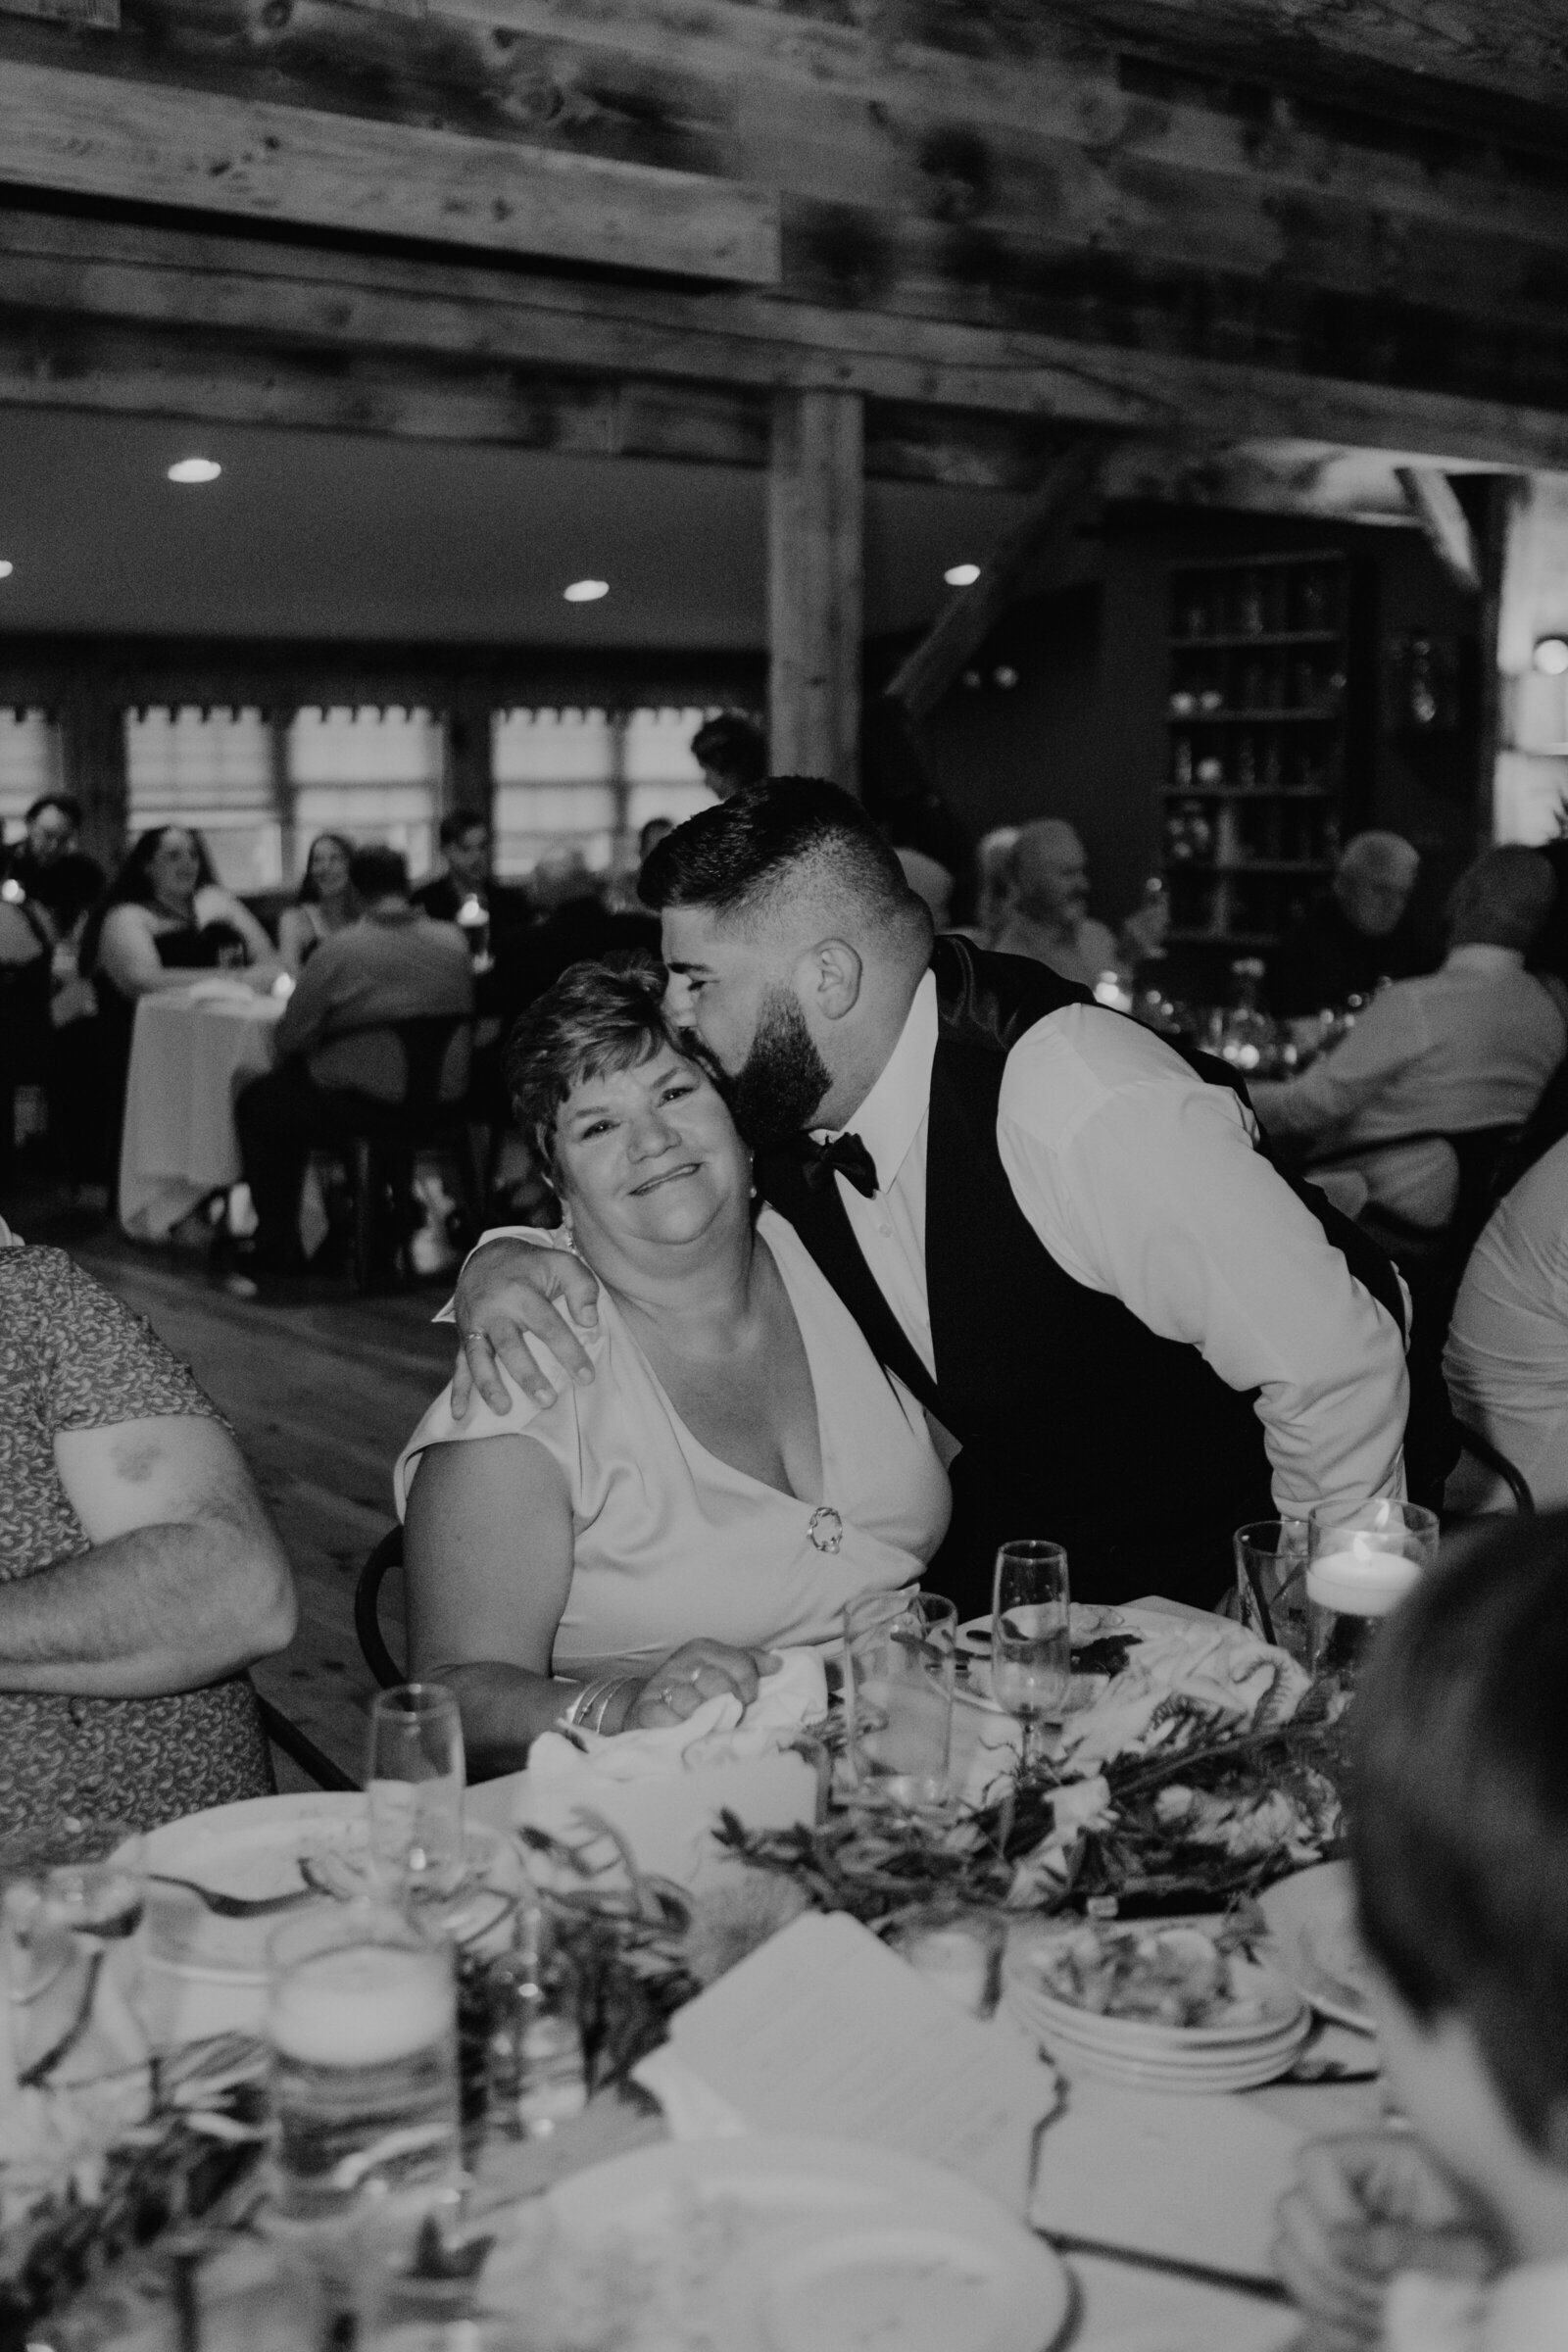 Hobbs Tavern and Brewery West Ossipee, NH Wedding Photography